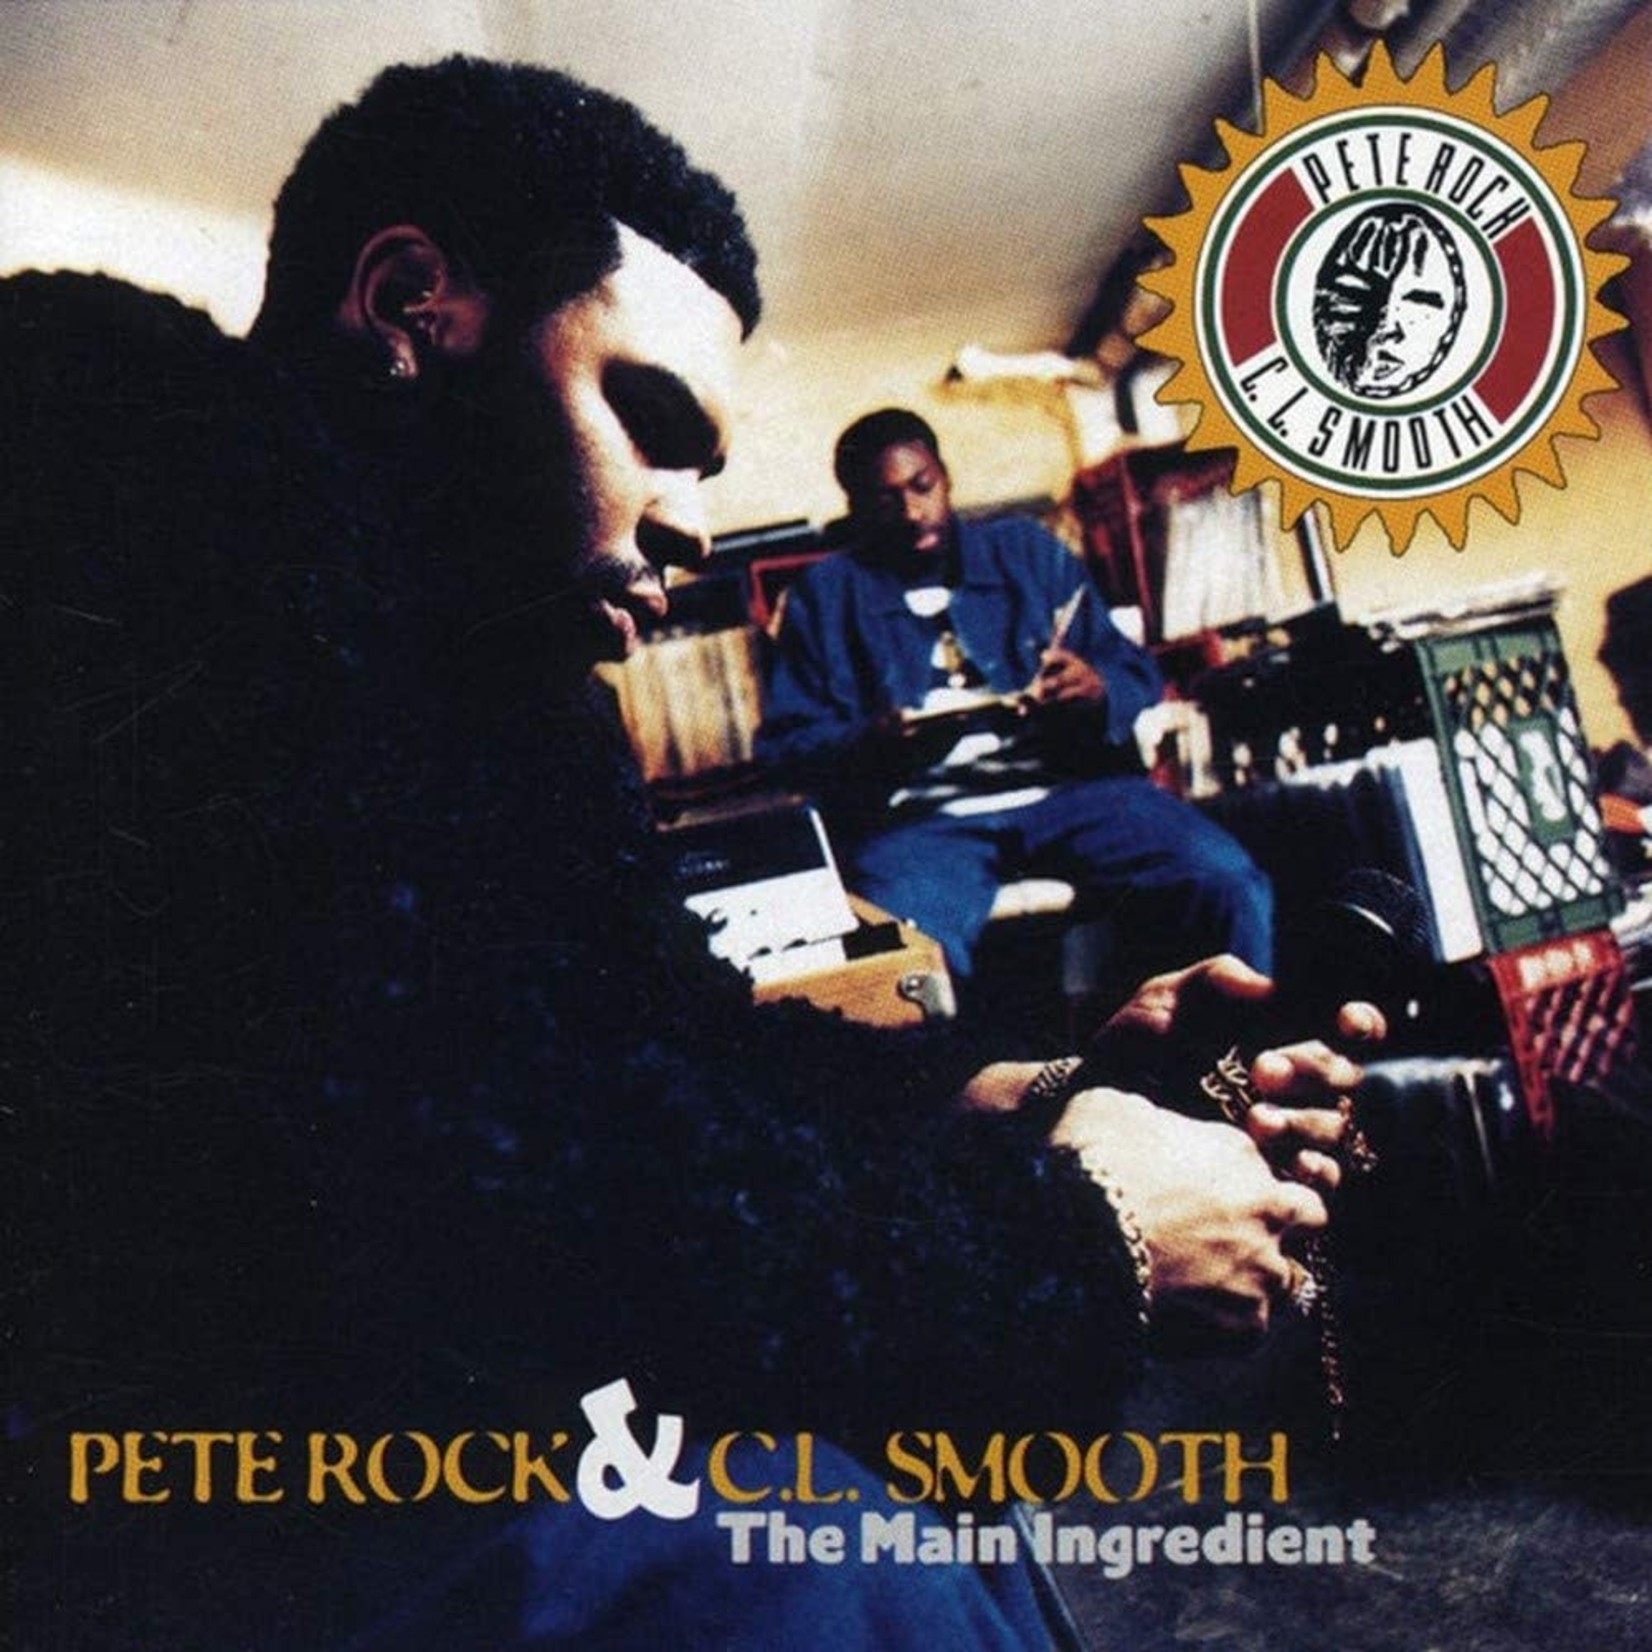 [New] Pete Rock & C.L. Smooth - The Main Ingredient (2LP, clear vinyl)